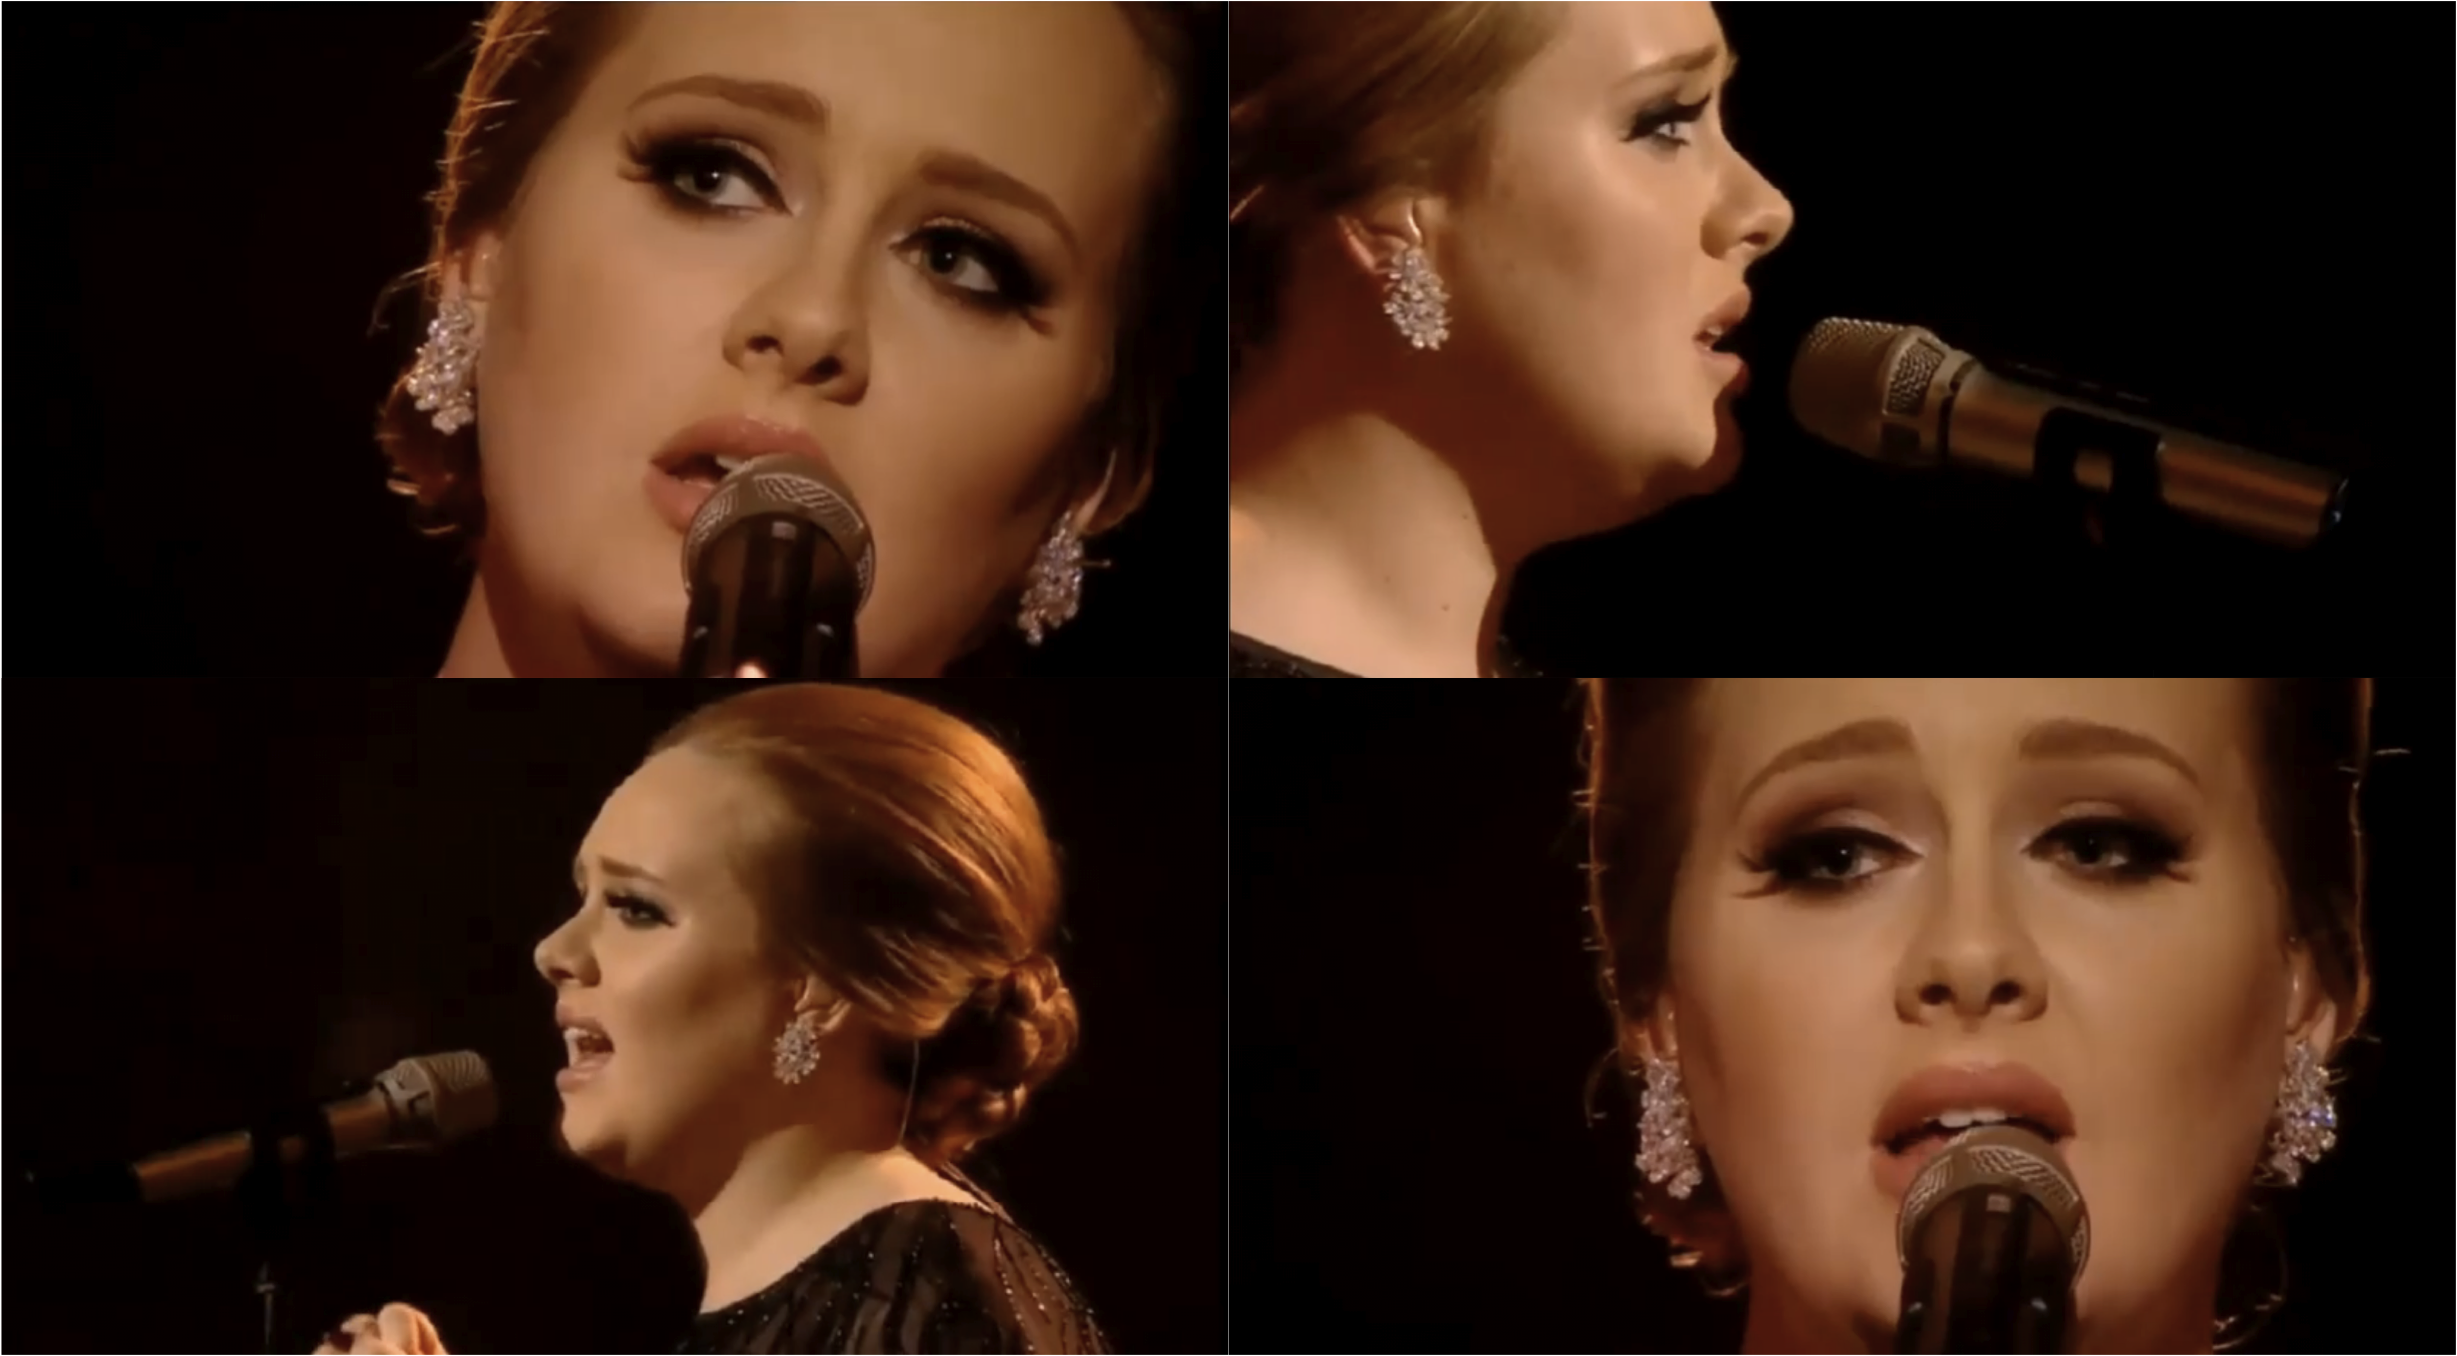 Someone Like You’ is the second single drafted from Adele ‘s 